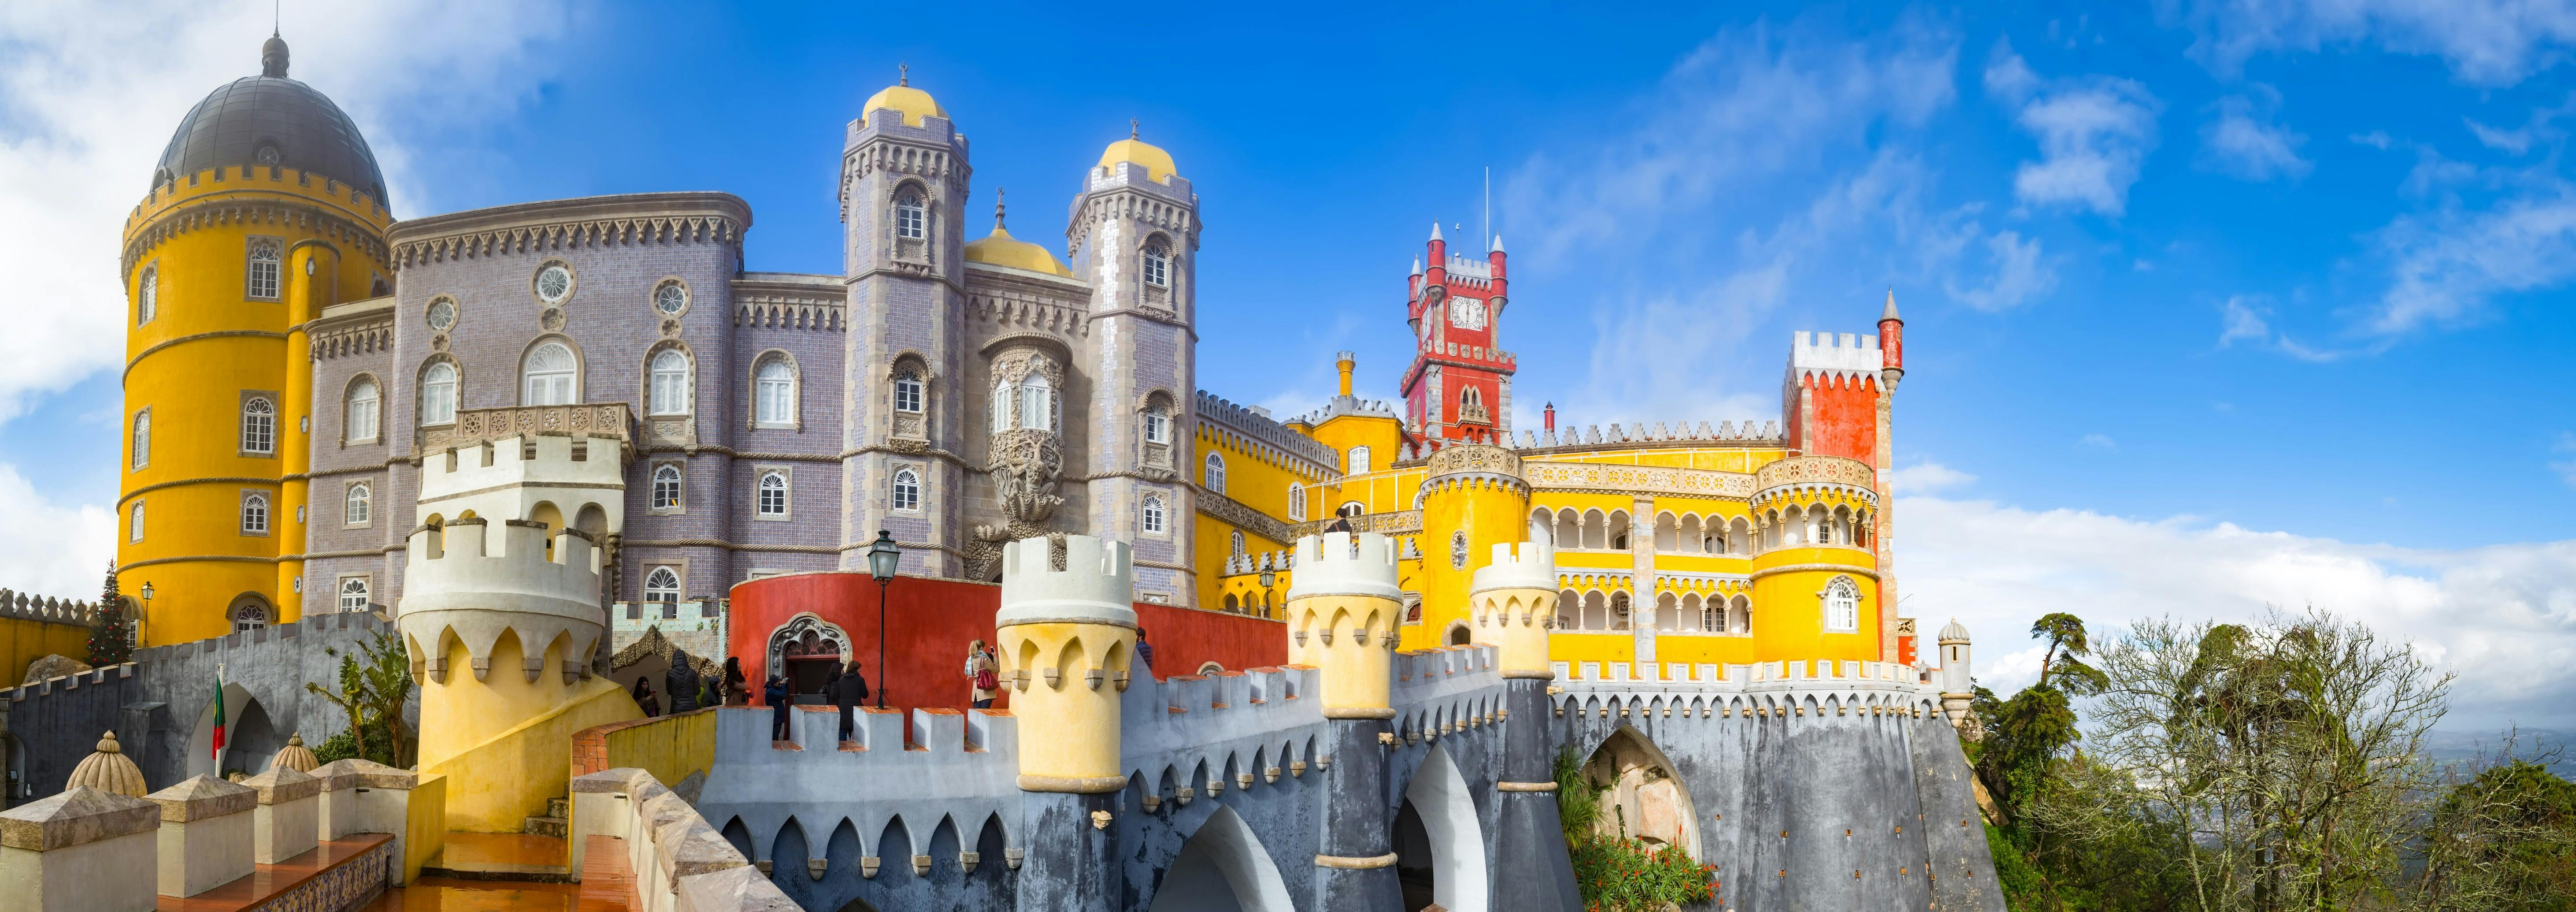 Private tour to Sintra from Lisbon